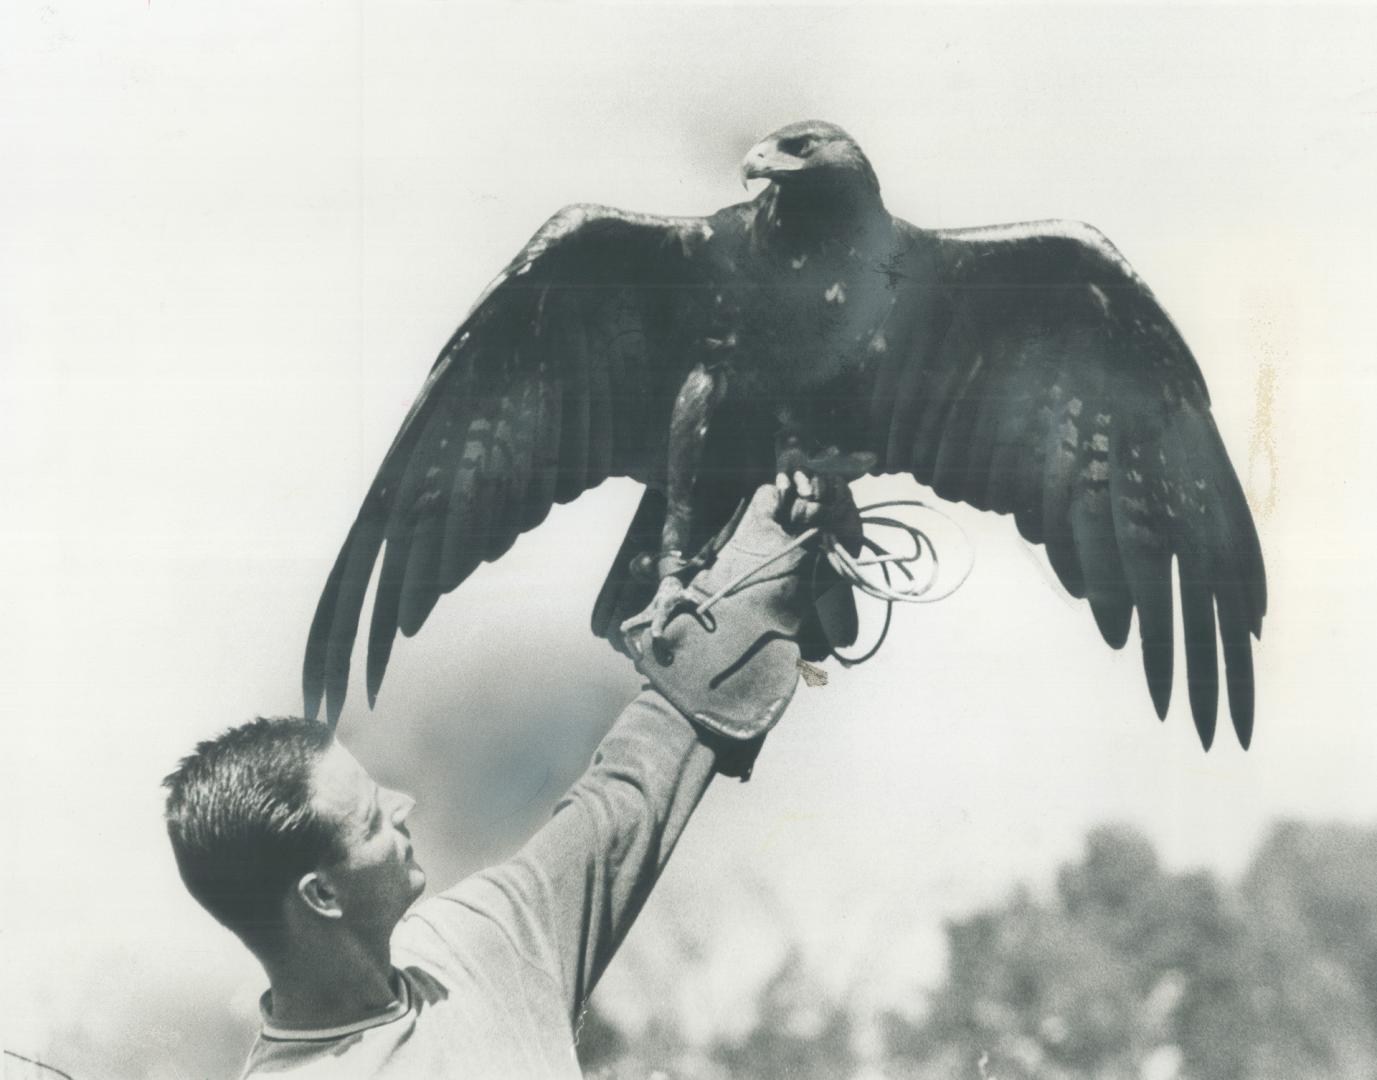 Professional Falconer Dieter Rosenkranz holds one of his Russian golden eagles aloft on his gloved hand